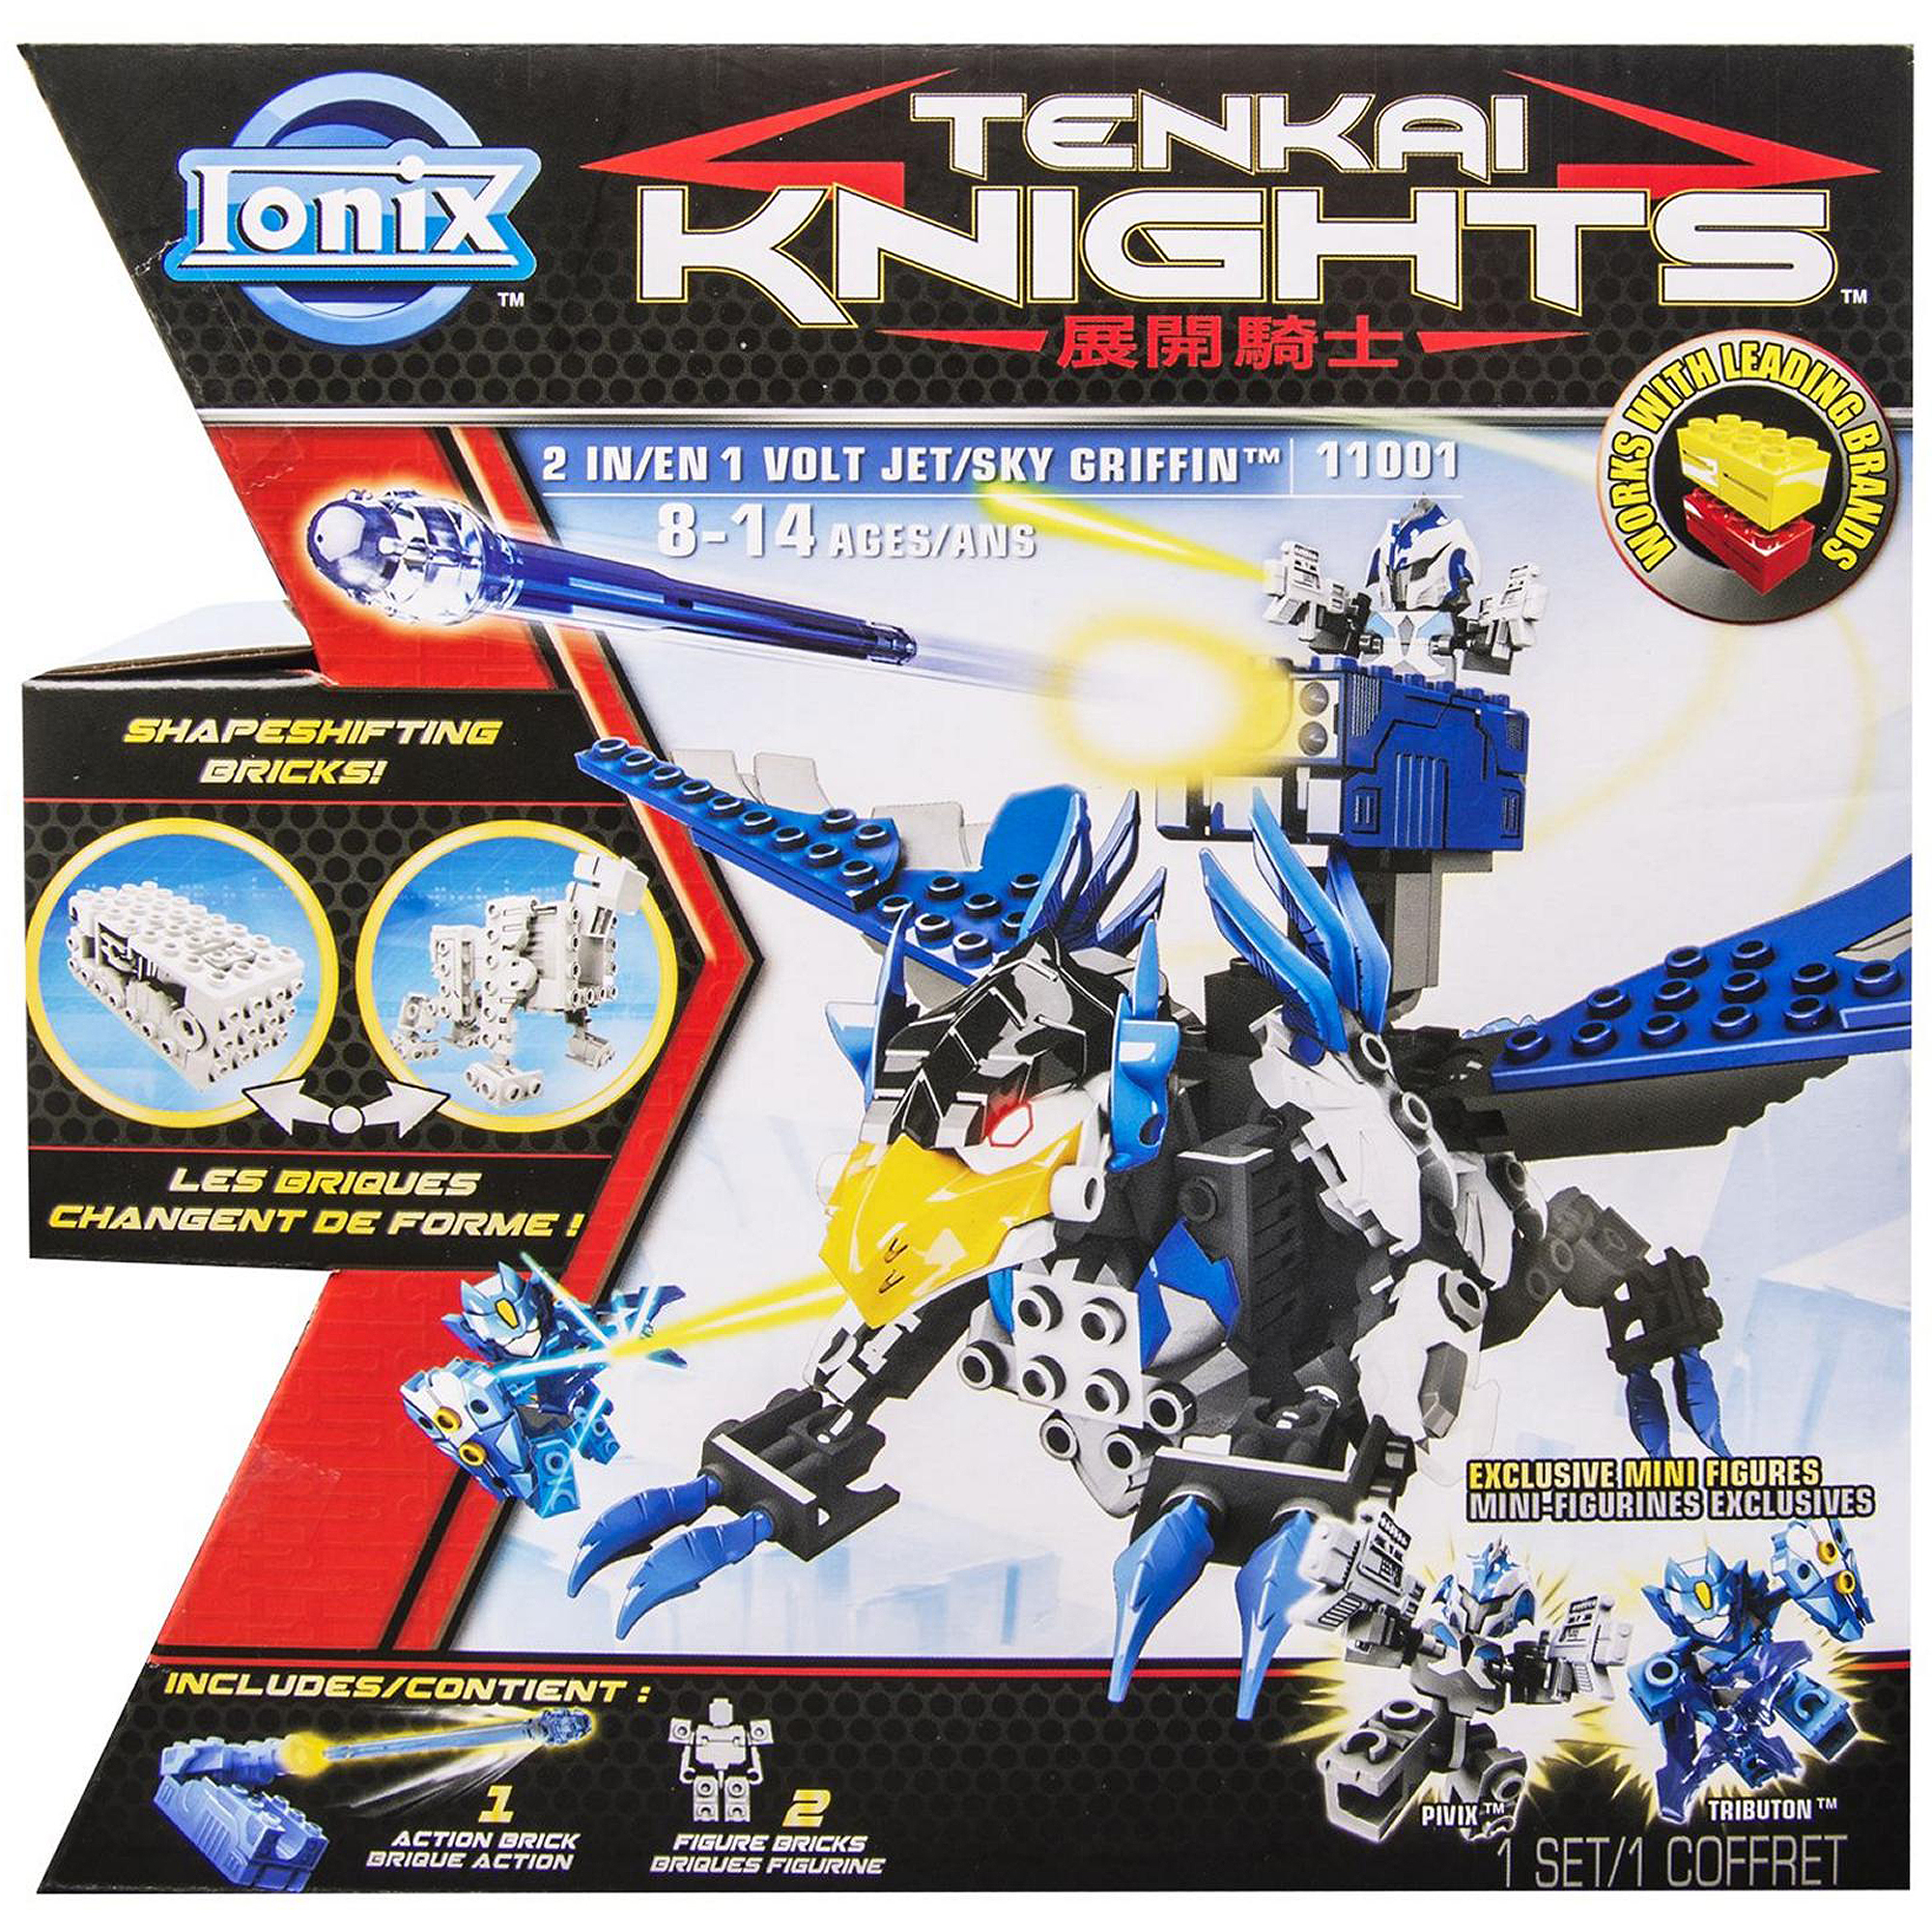 Ionix Tenkai Knights 2-in-1 Volt Jey/Sky Griffin Building Set - image 1 of 4